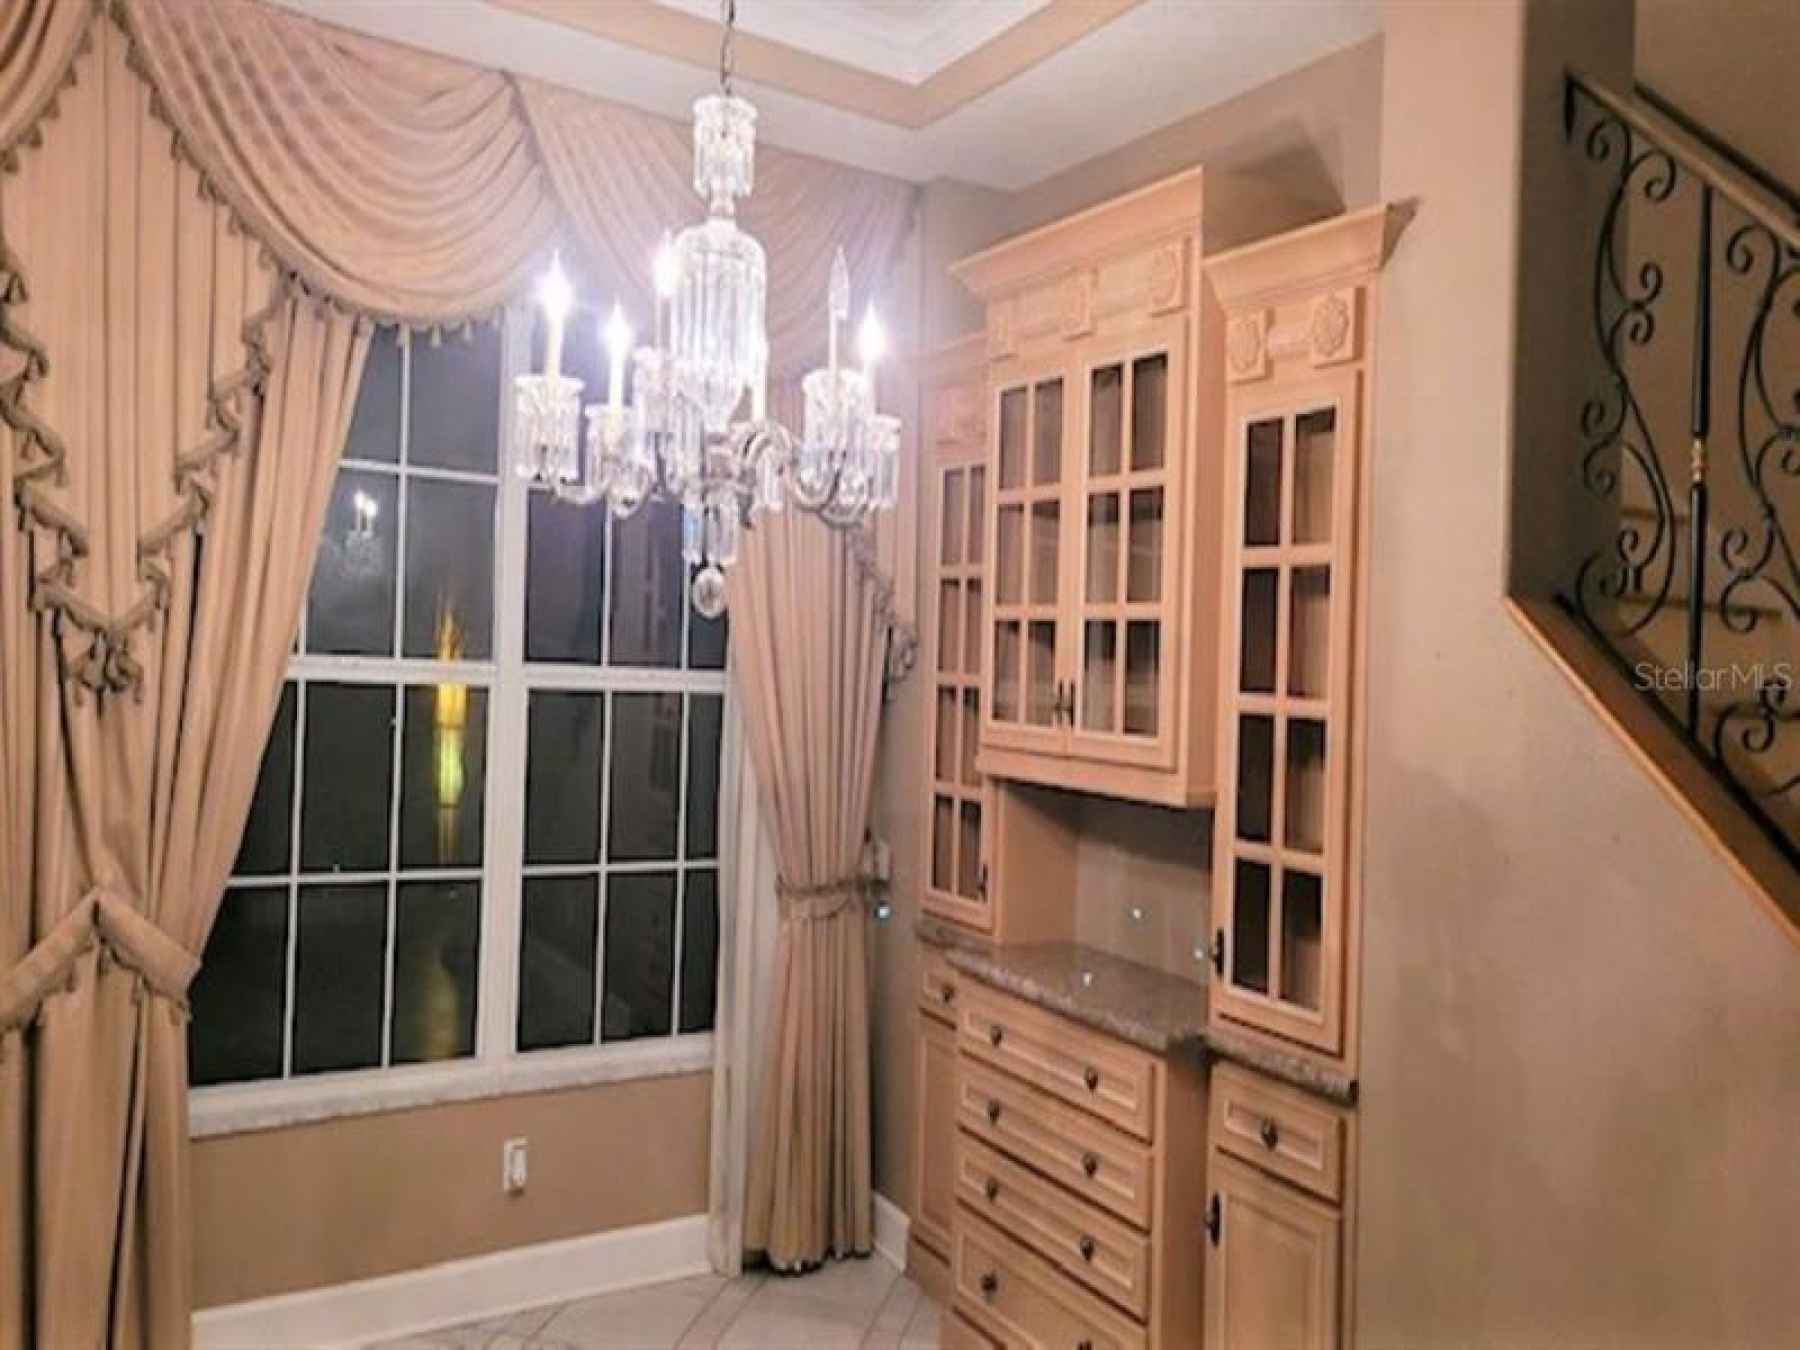 Dining Room With Built-in China Cabinet